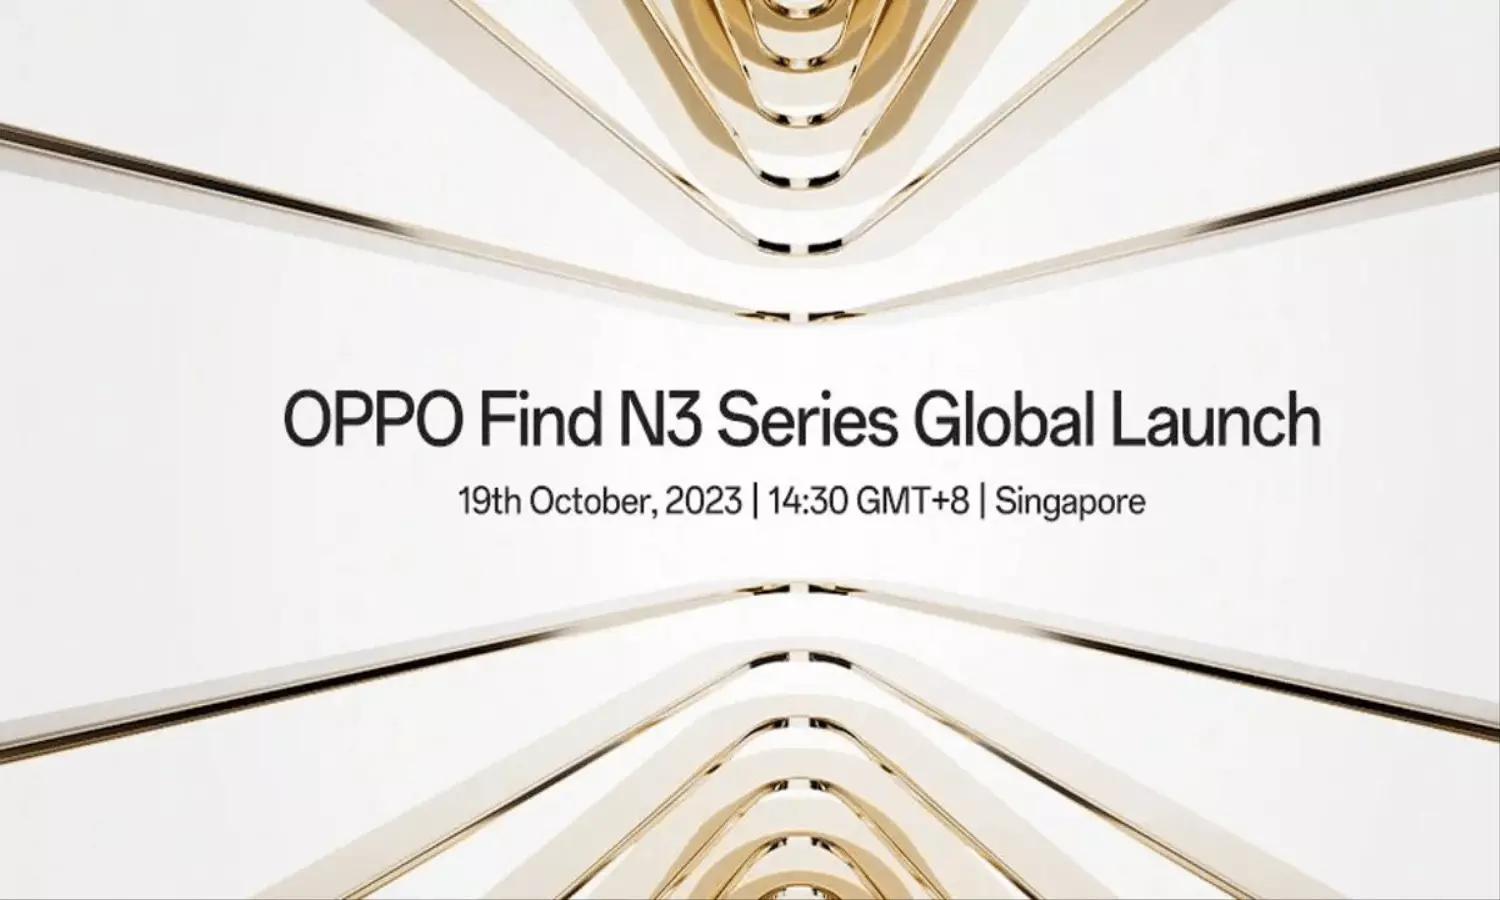 OPPO Find N3 Price and Specification